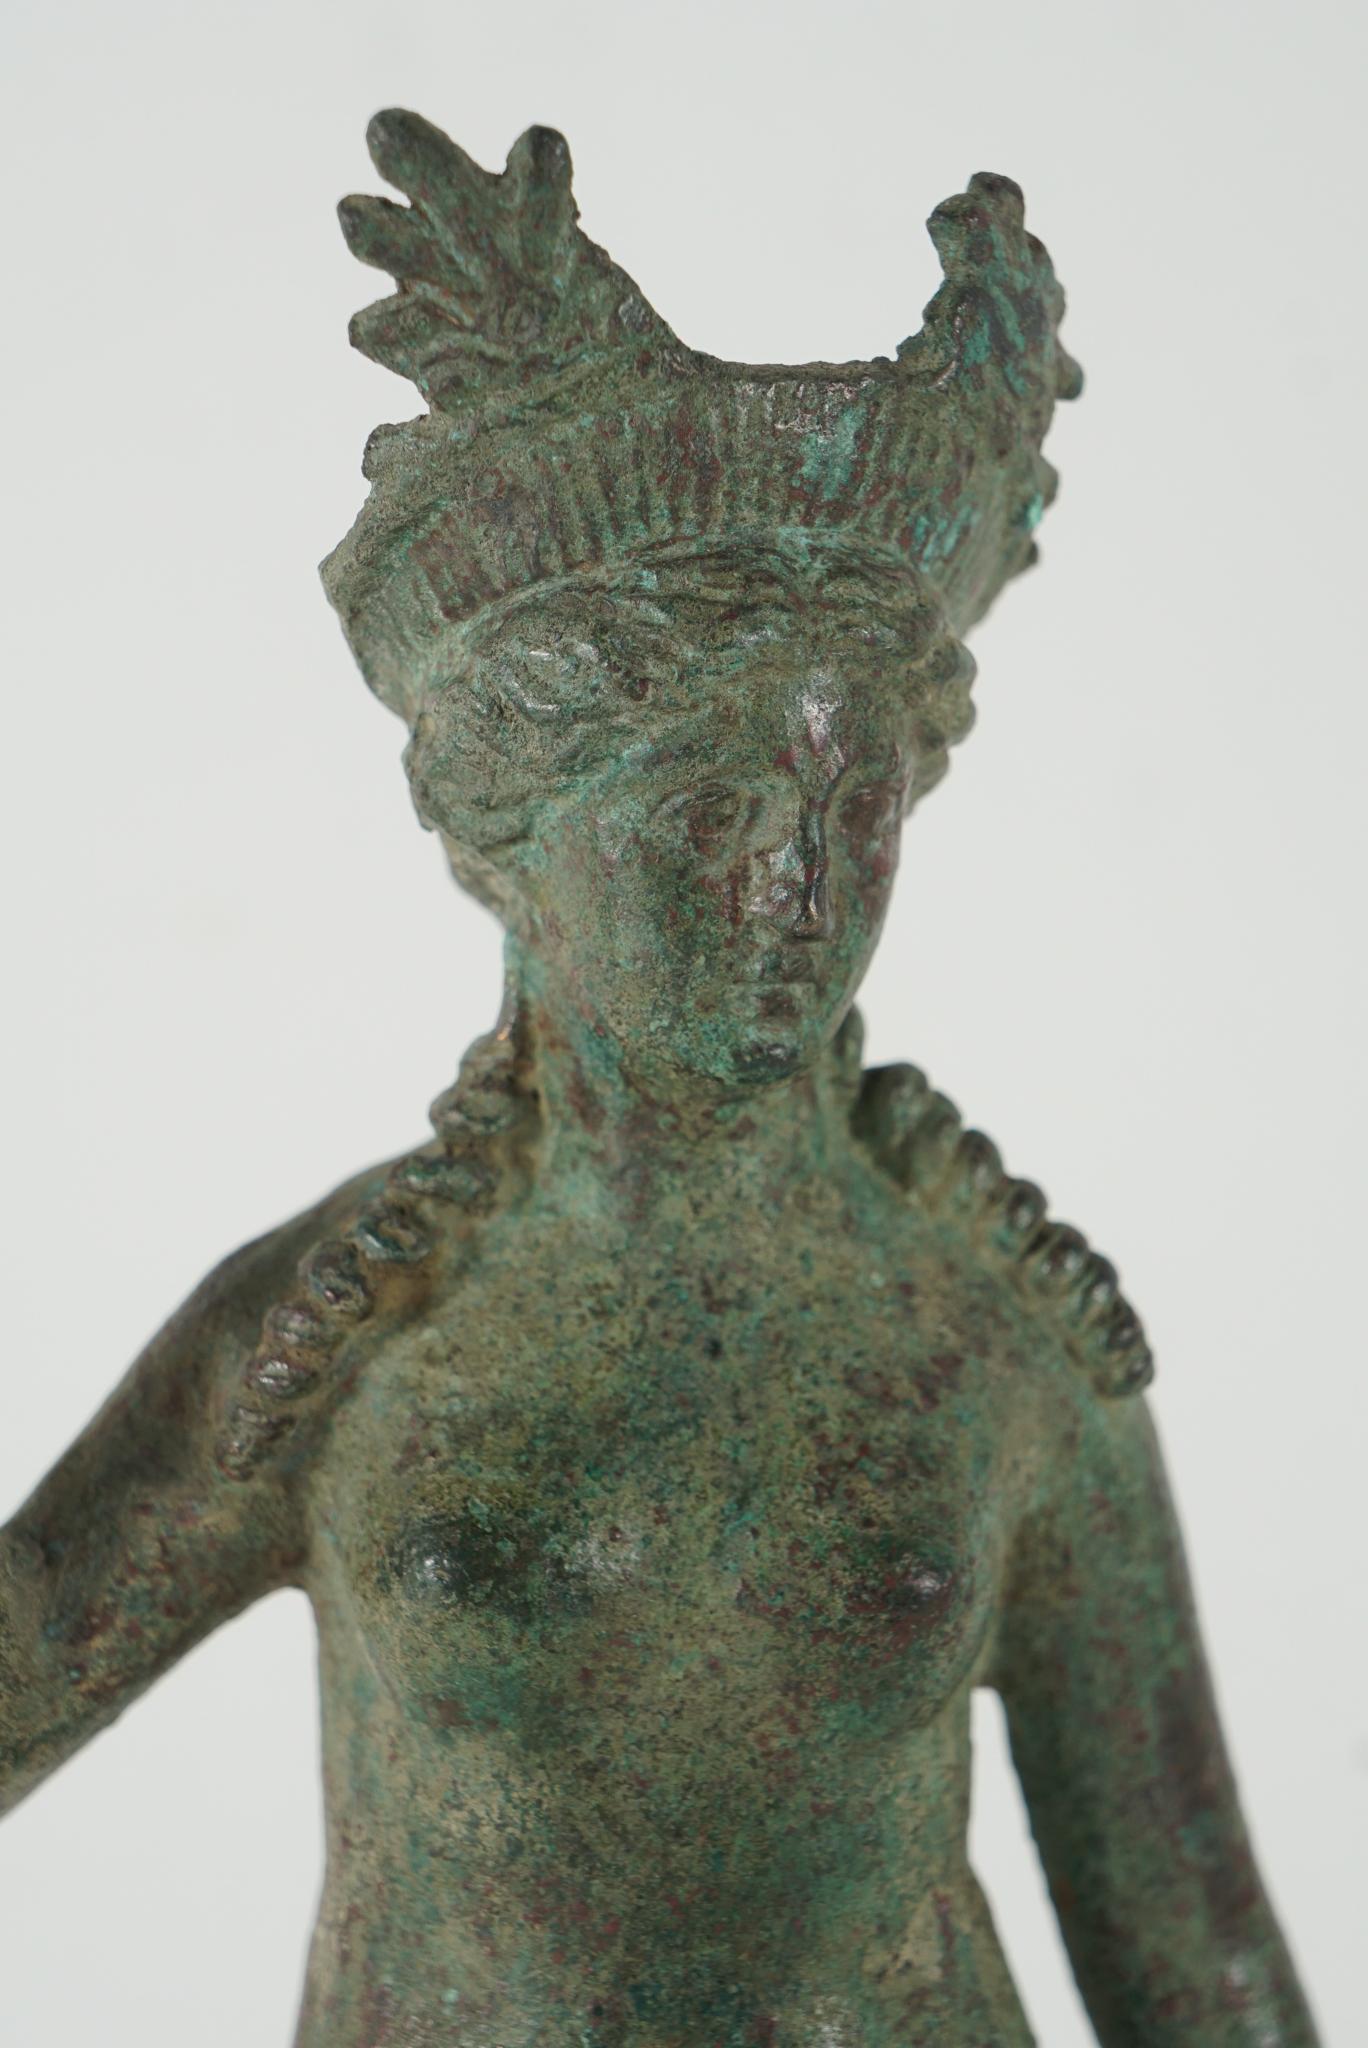 This fine ancient bronze statue of Isis/Aphrodite, a syncretistic goddess of Hellenistic origin combines, the Egyptian goddess Isis with the Greek goddess Aphrodite. Created between the second century BC and the first century AD. This figure is